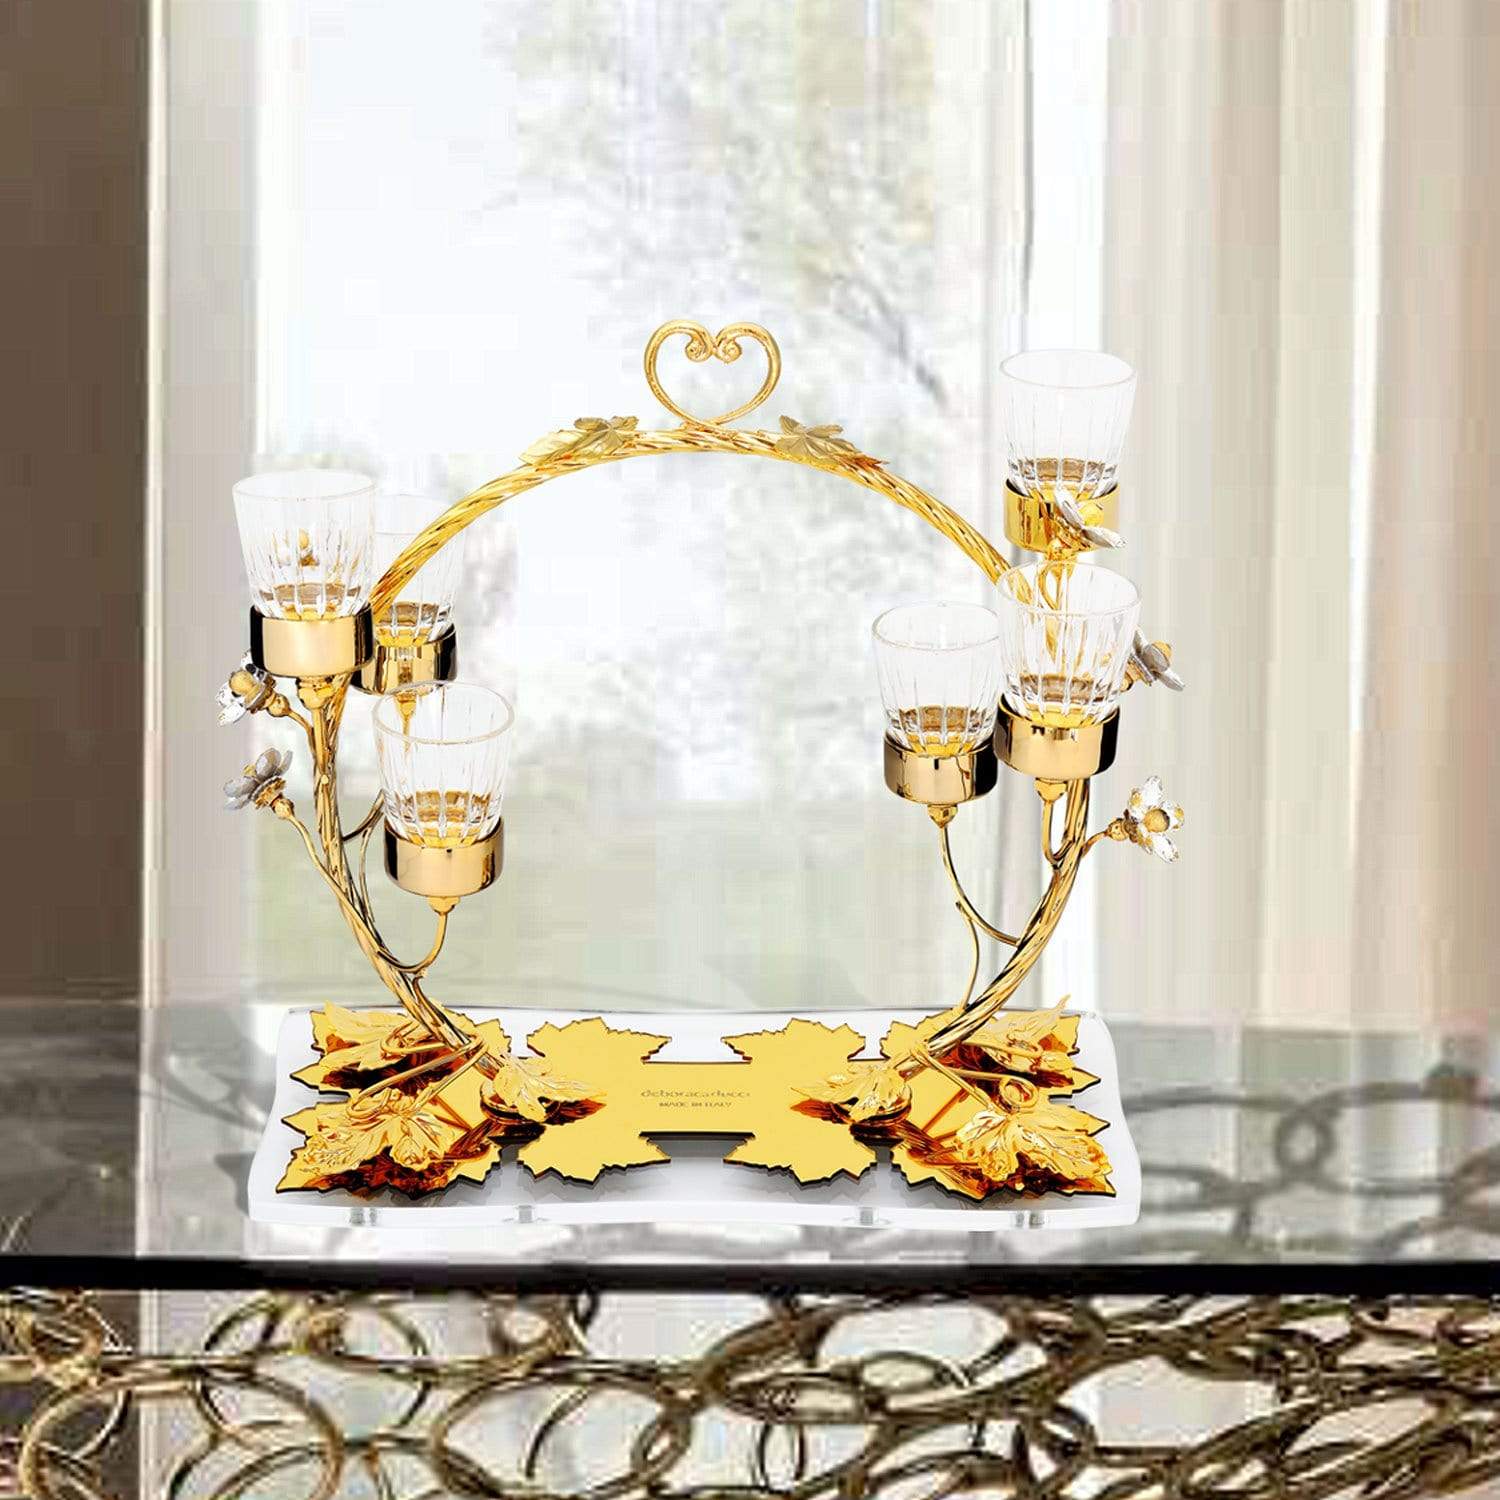 DEBORA CARLUCCI CIRCLE CANDLE HOLDER IN GOLD METAL WITH 6 GLASS - DC6172 GOLD